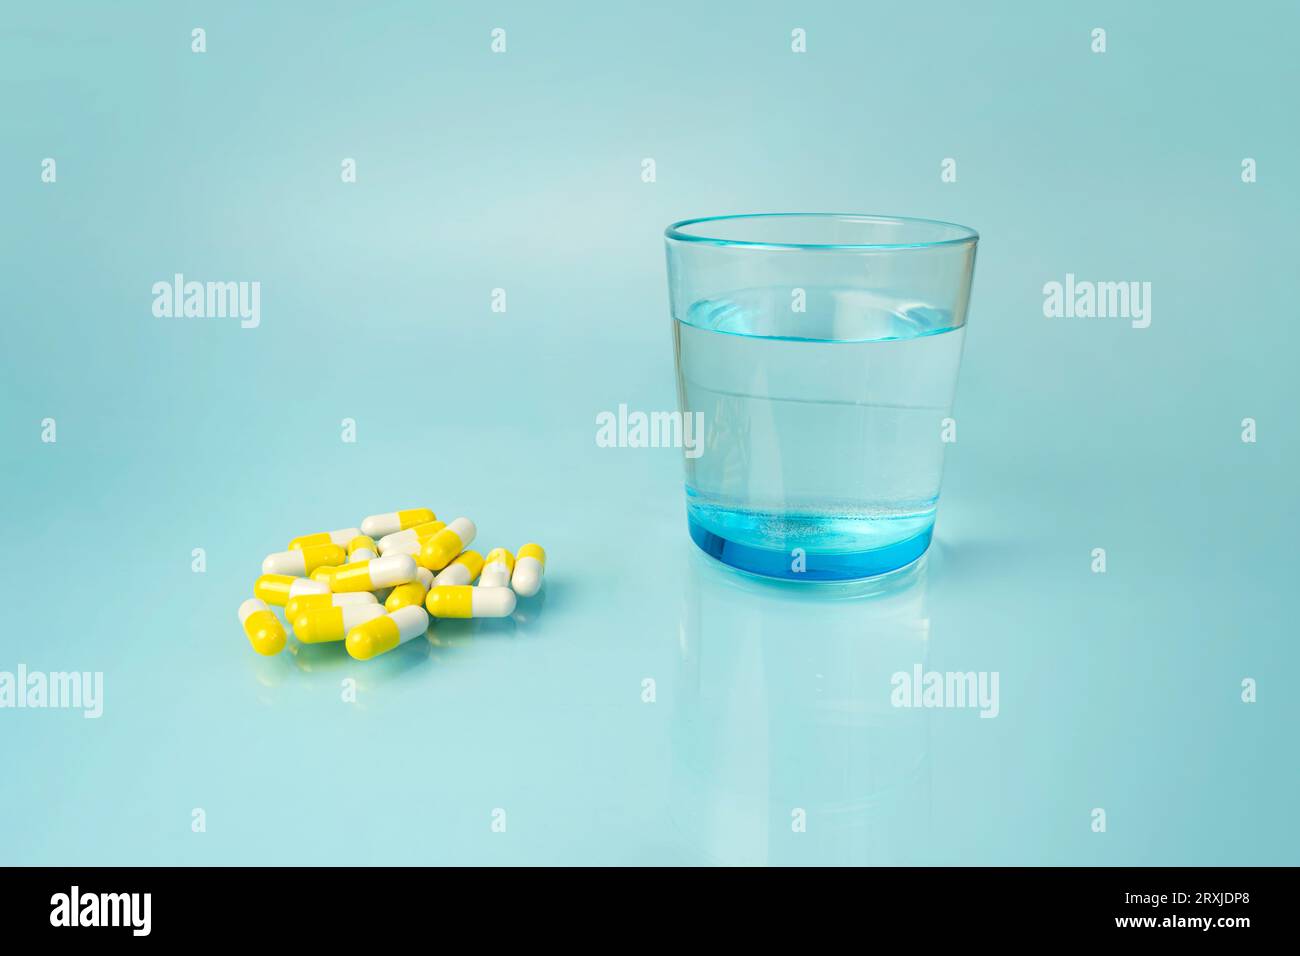 white and yellow medical pills, vitamins, in the distance there is a beautiful blue glass with clean water, on a harmonious bright blue background. Ta Stock Photo